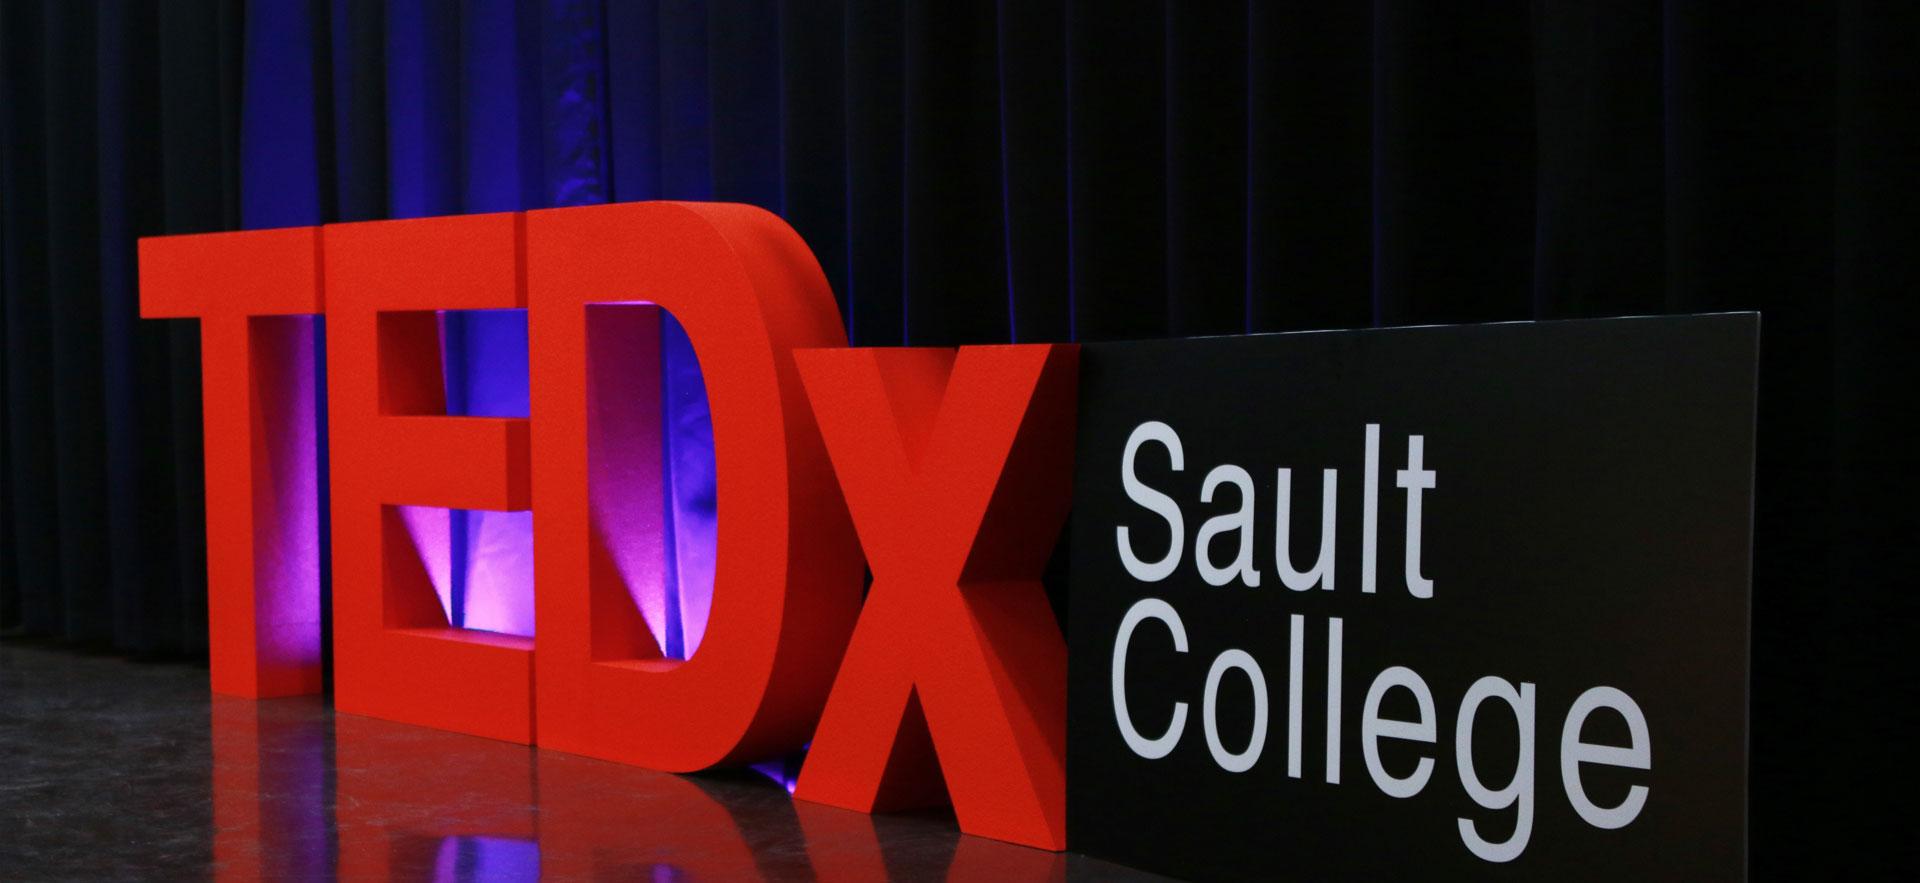 TEDX 3d letters on the stage